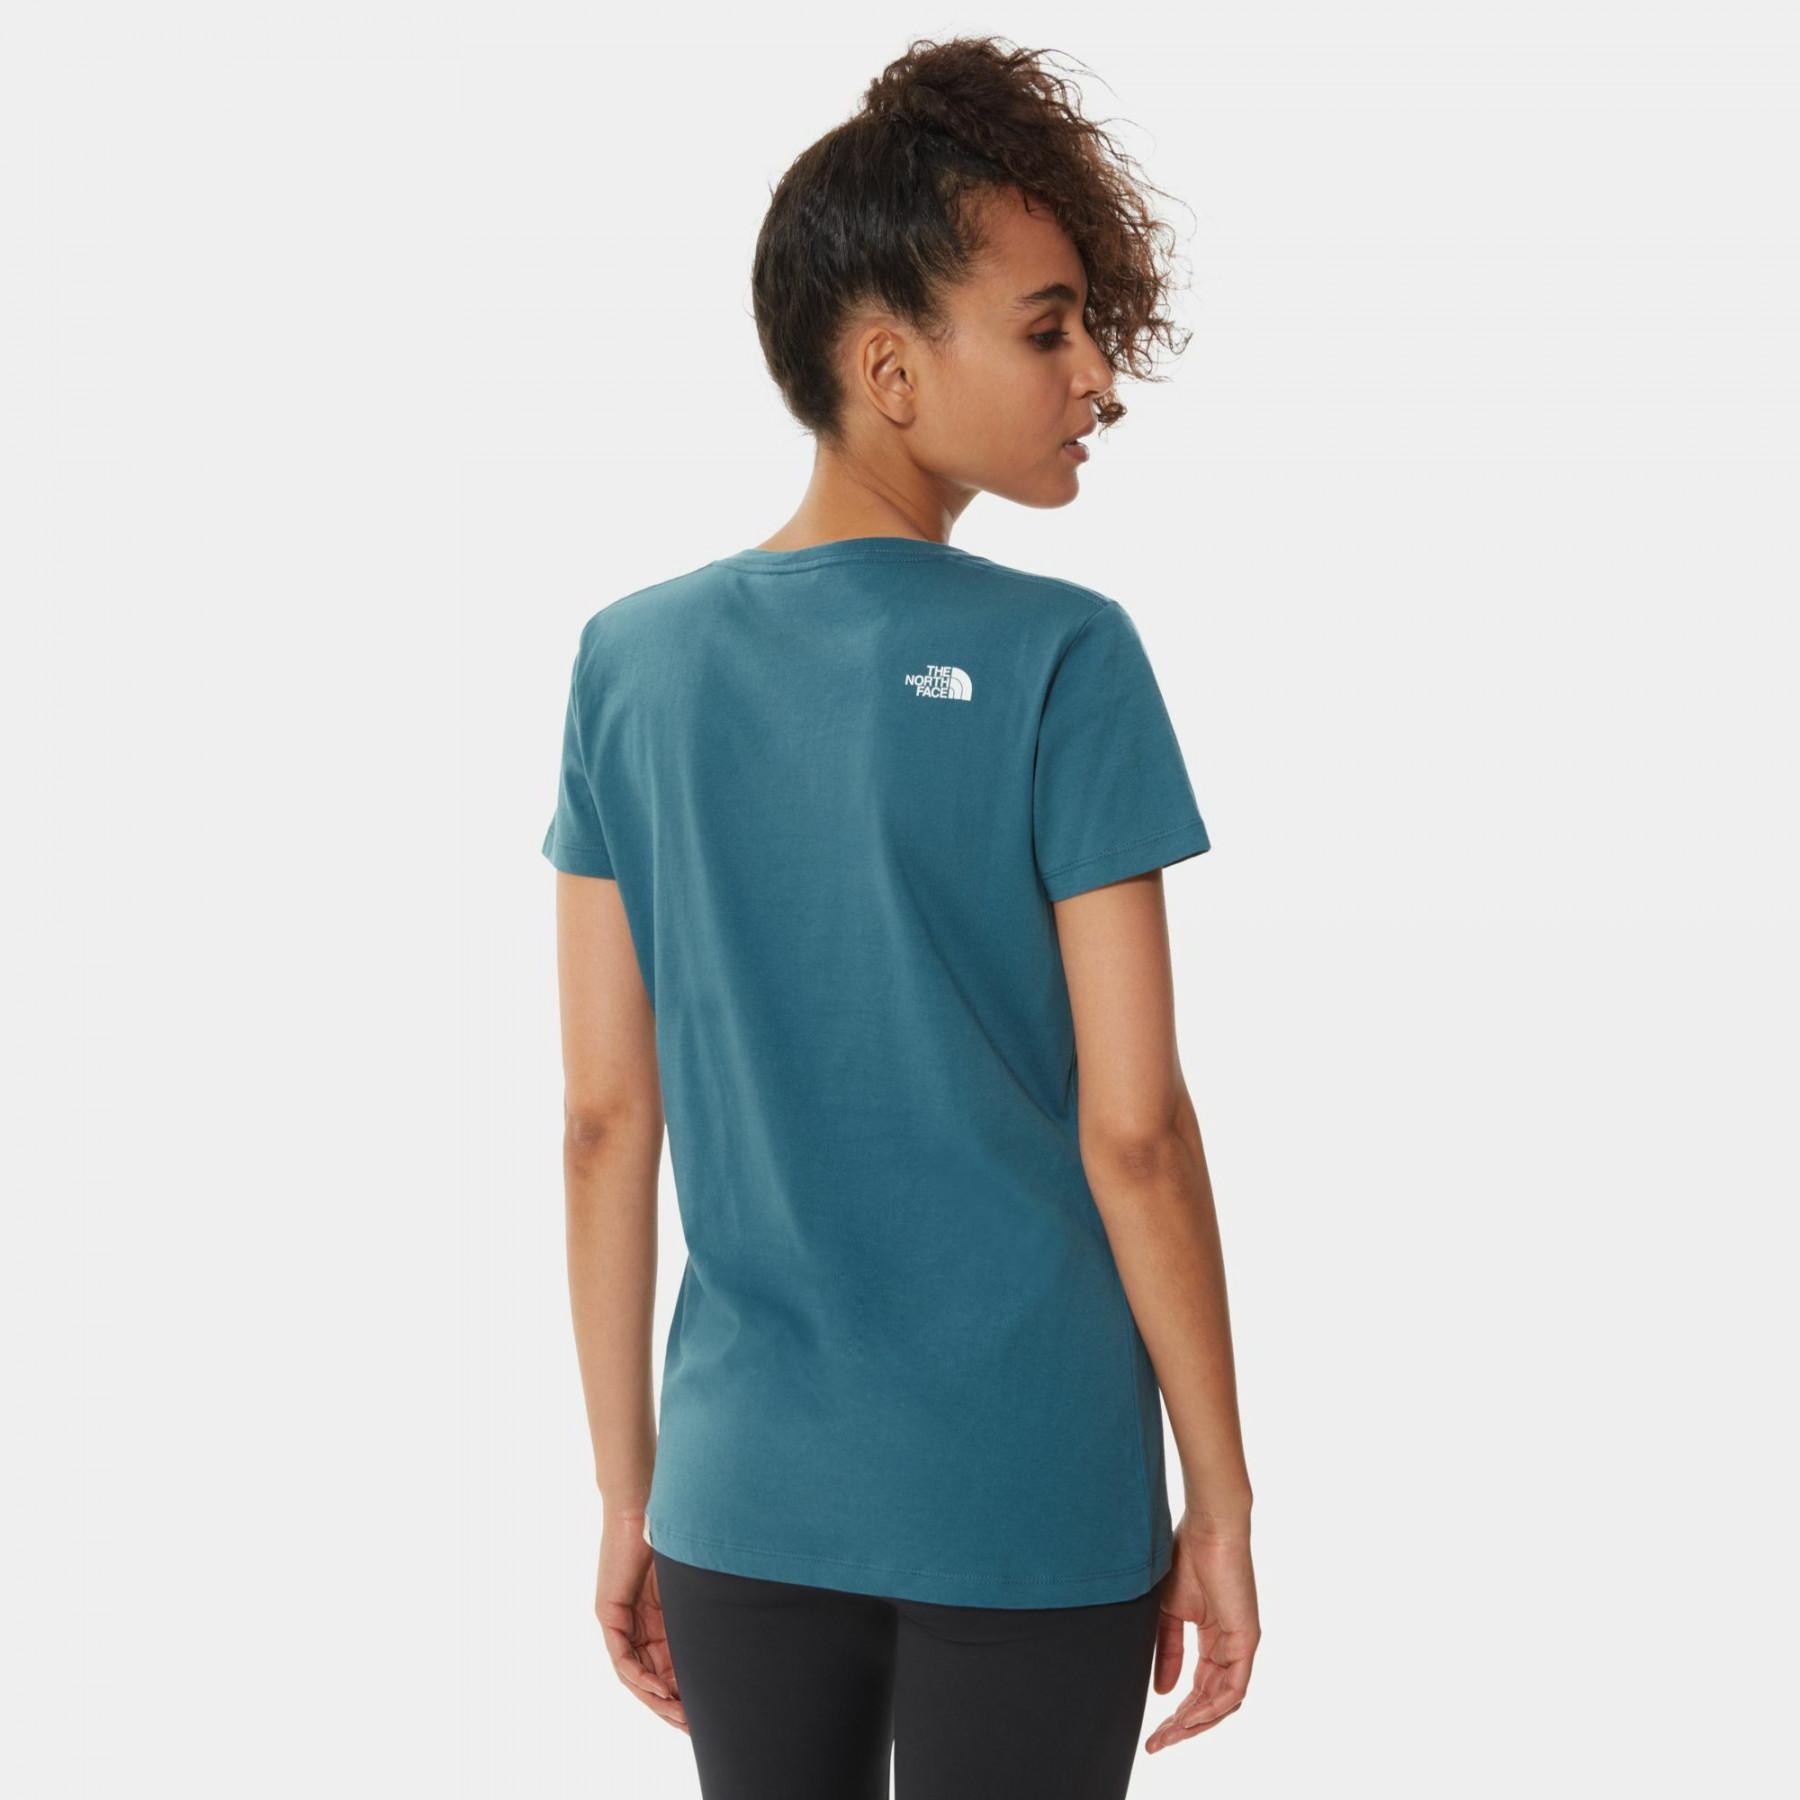 Damen-T-Shirt The North Face Easy